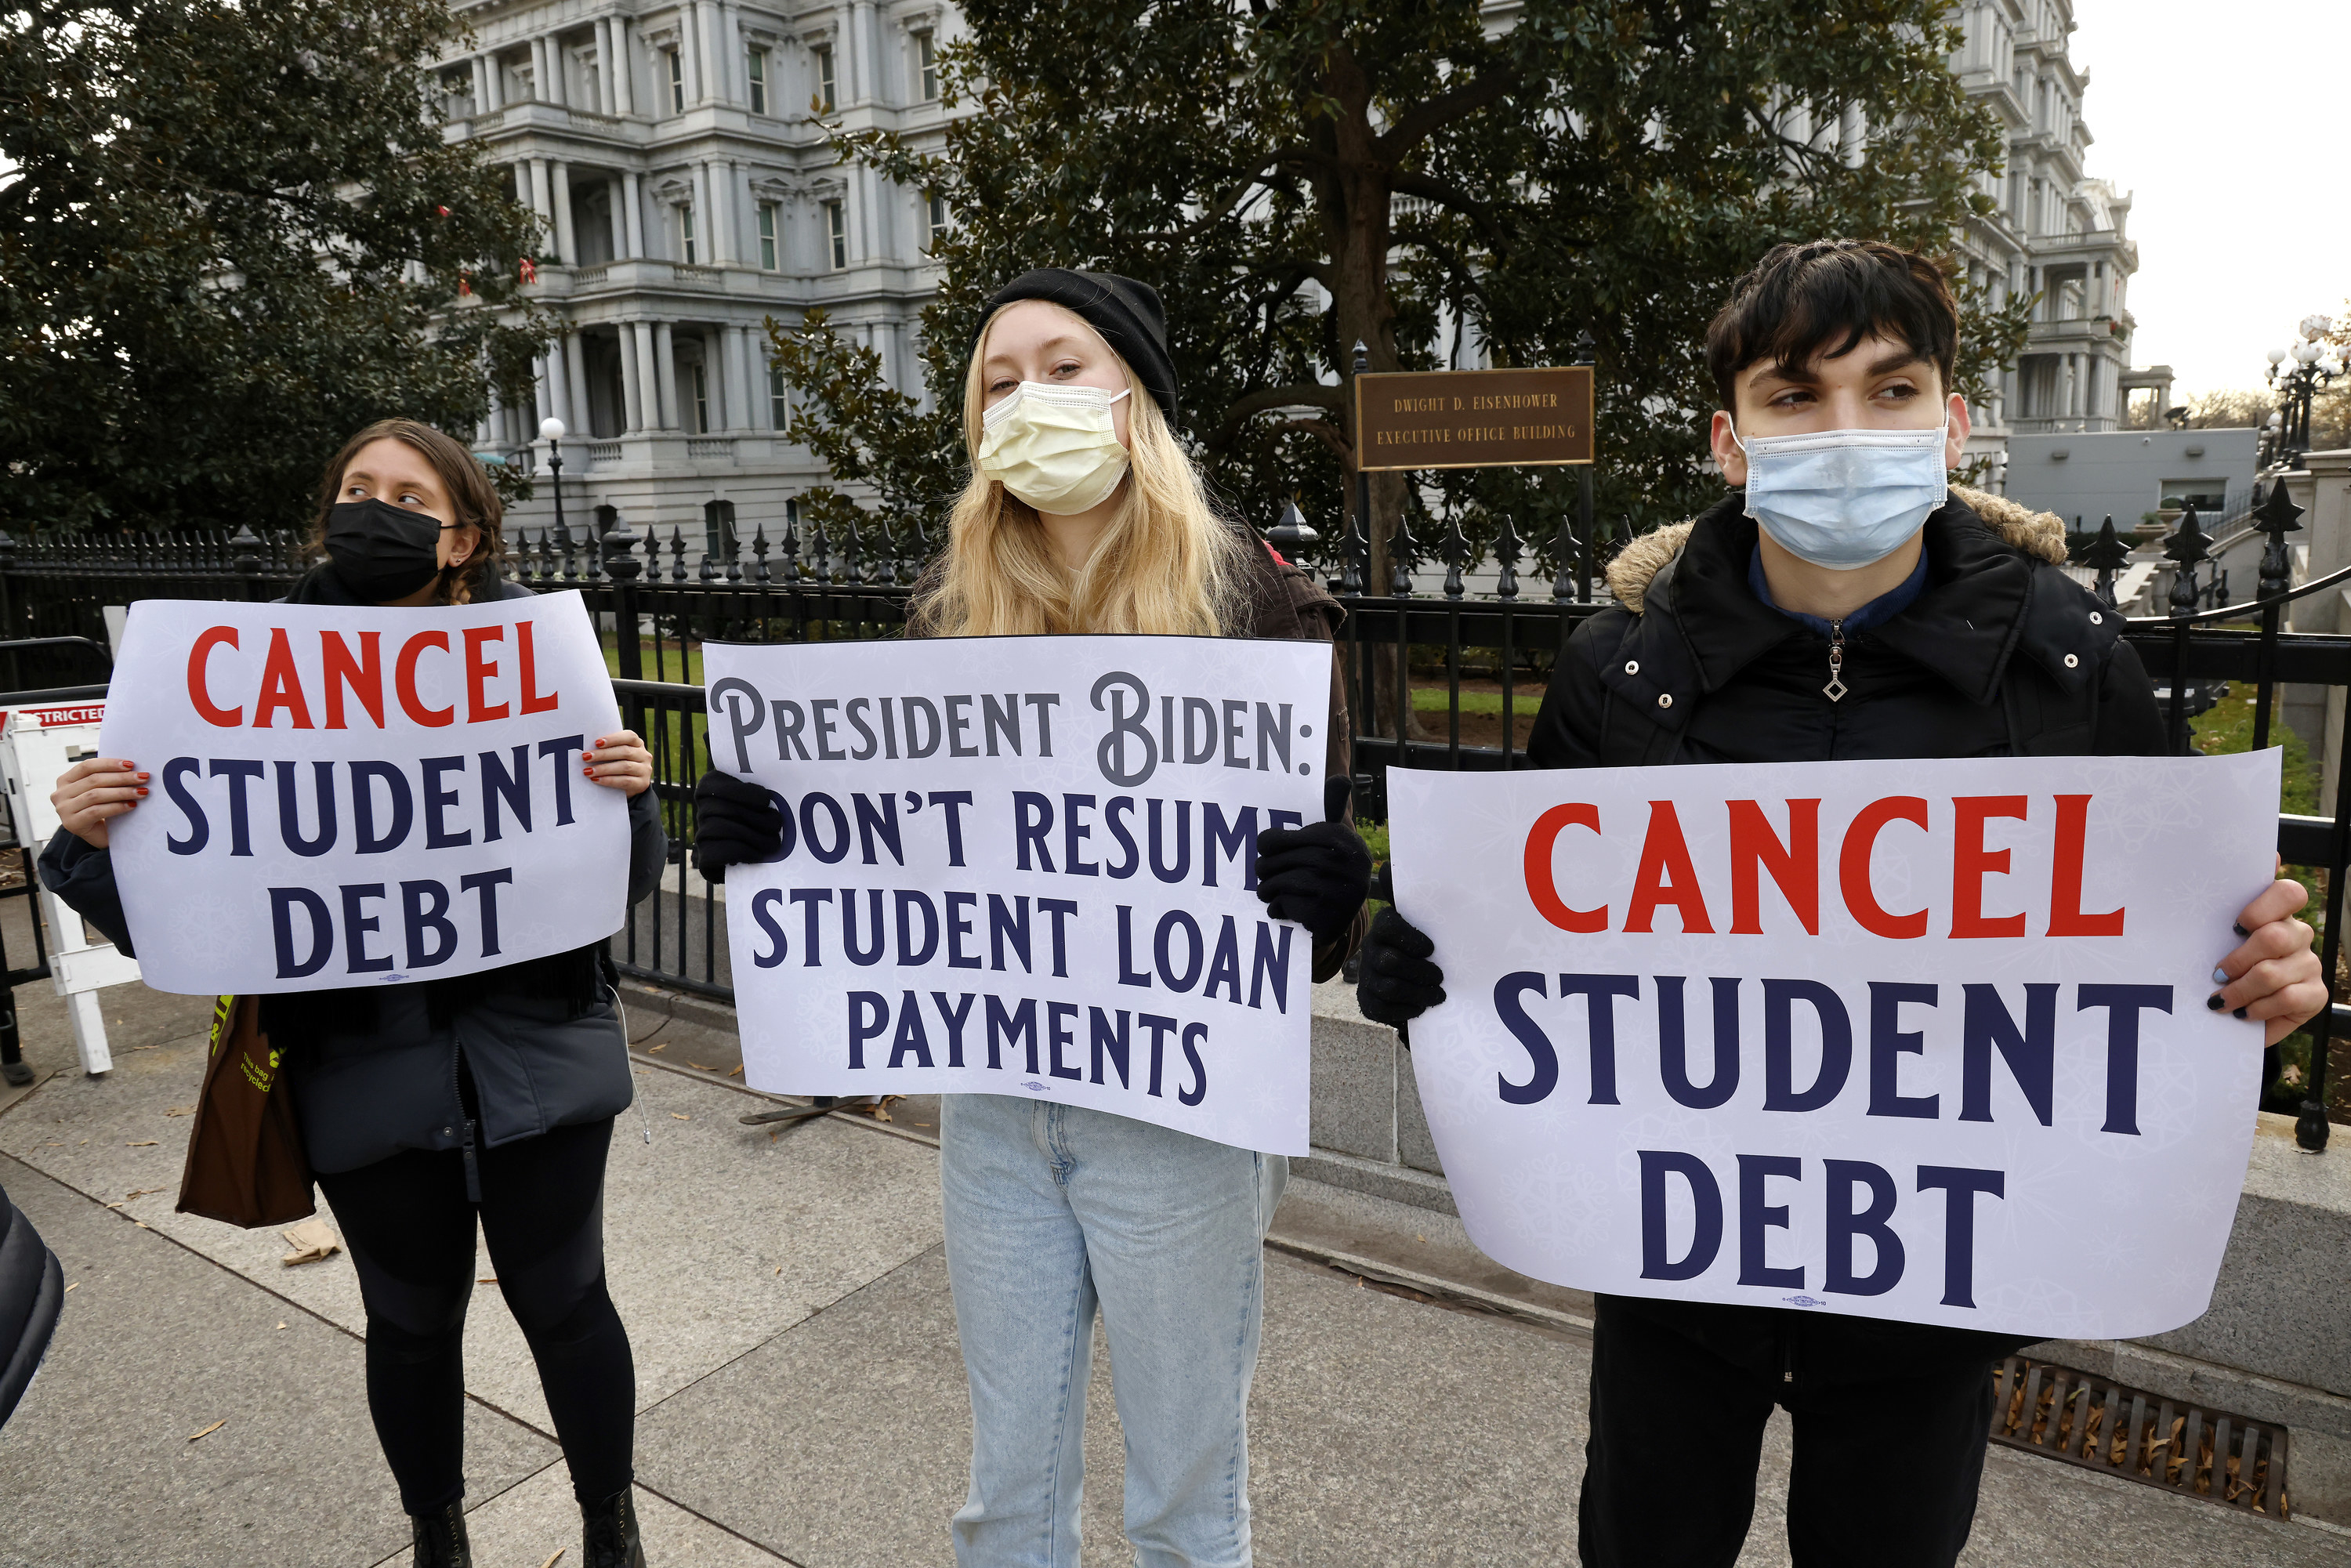 Protesters near the White House with cancel student debt signs